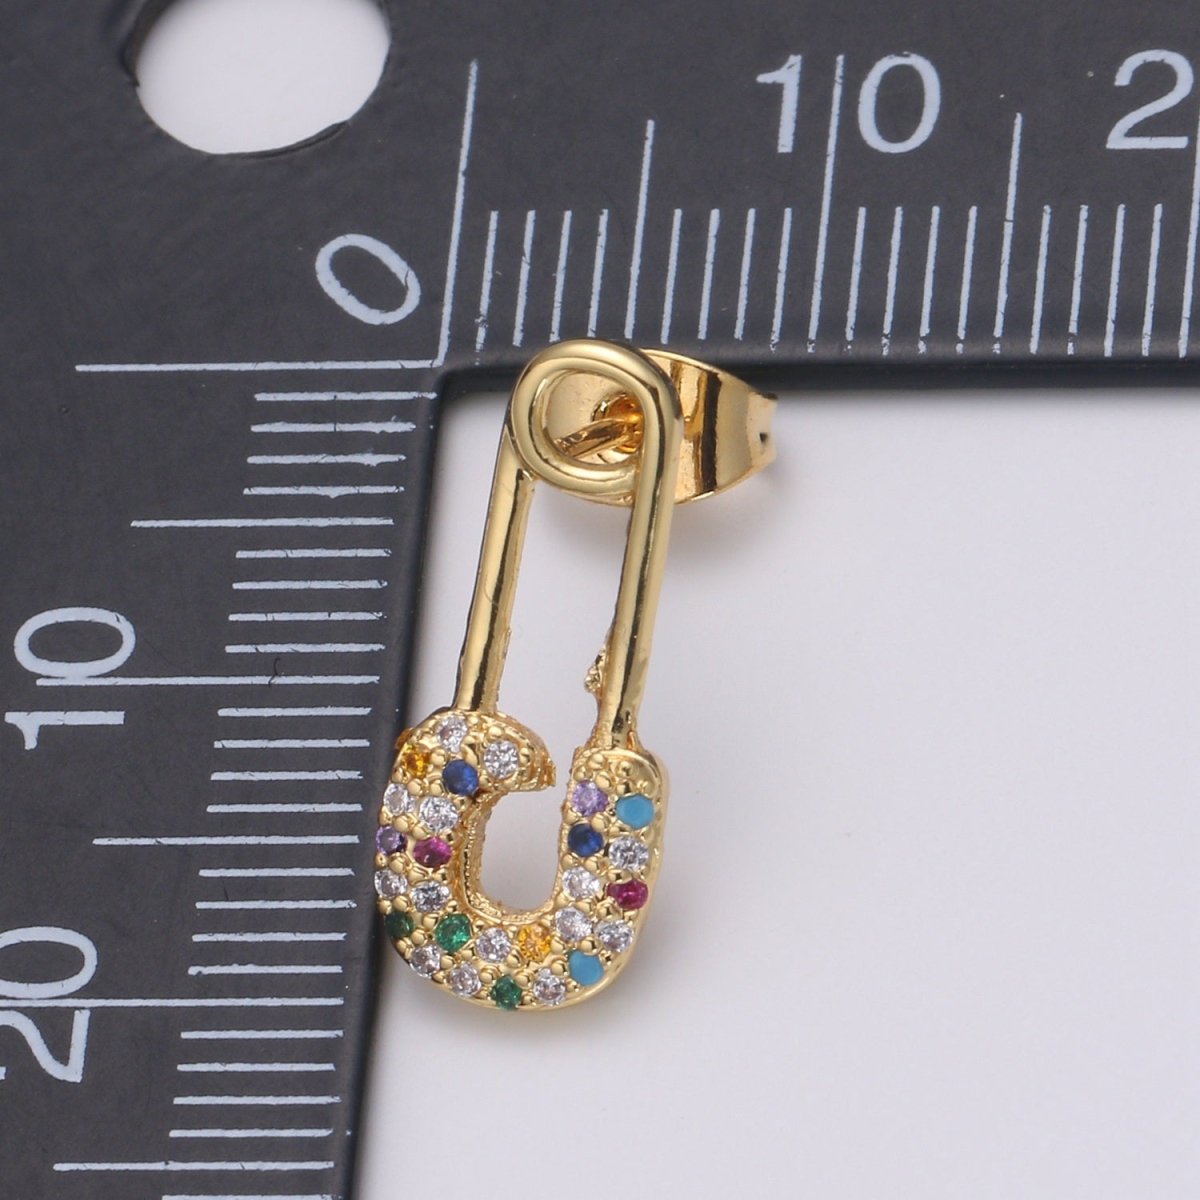 Safety Pin Earring 24K Gold Multi Color Pave Cz Stud Earring, Chunky Stud Design Earring, Q-512 - DLUXCA